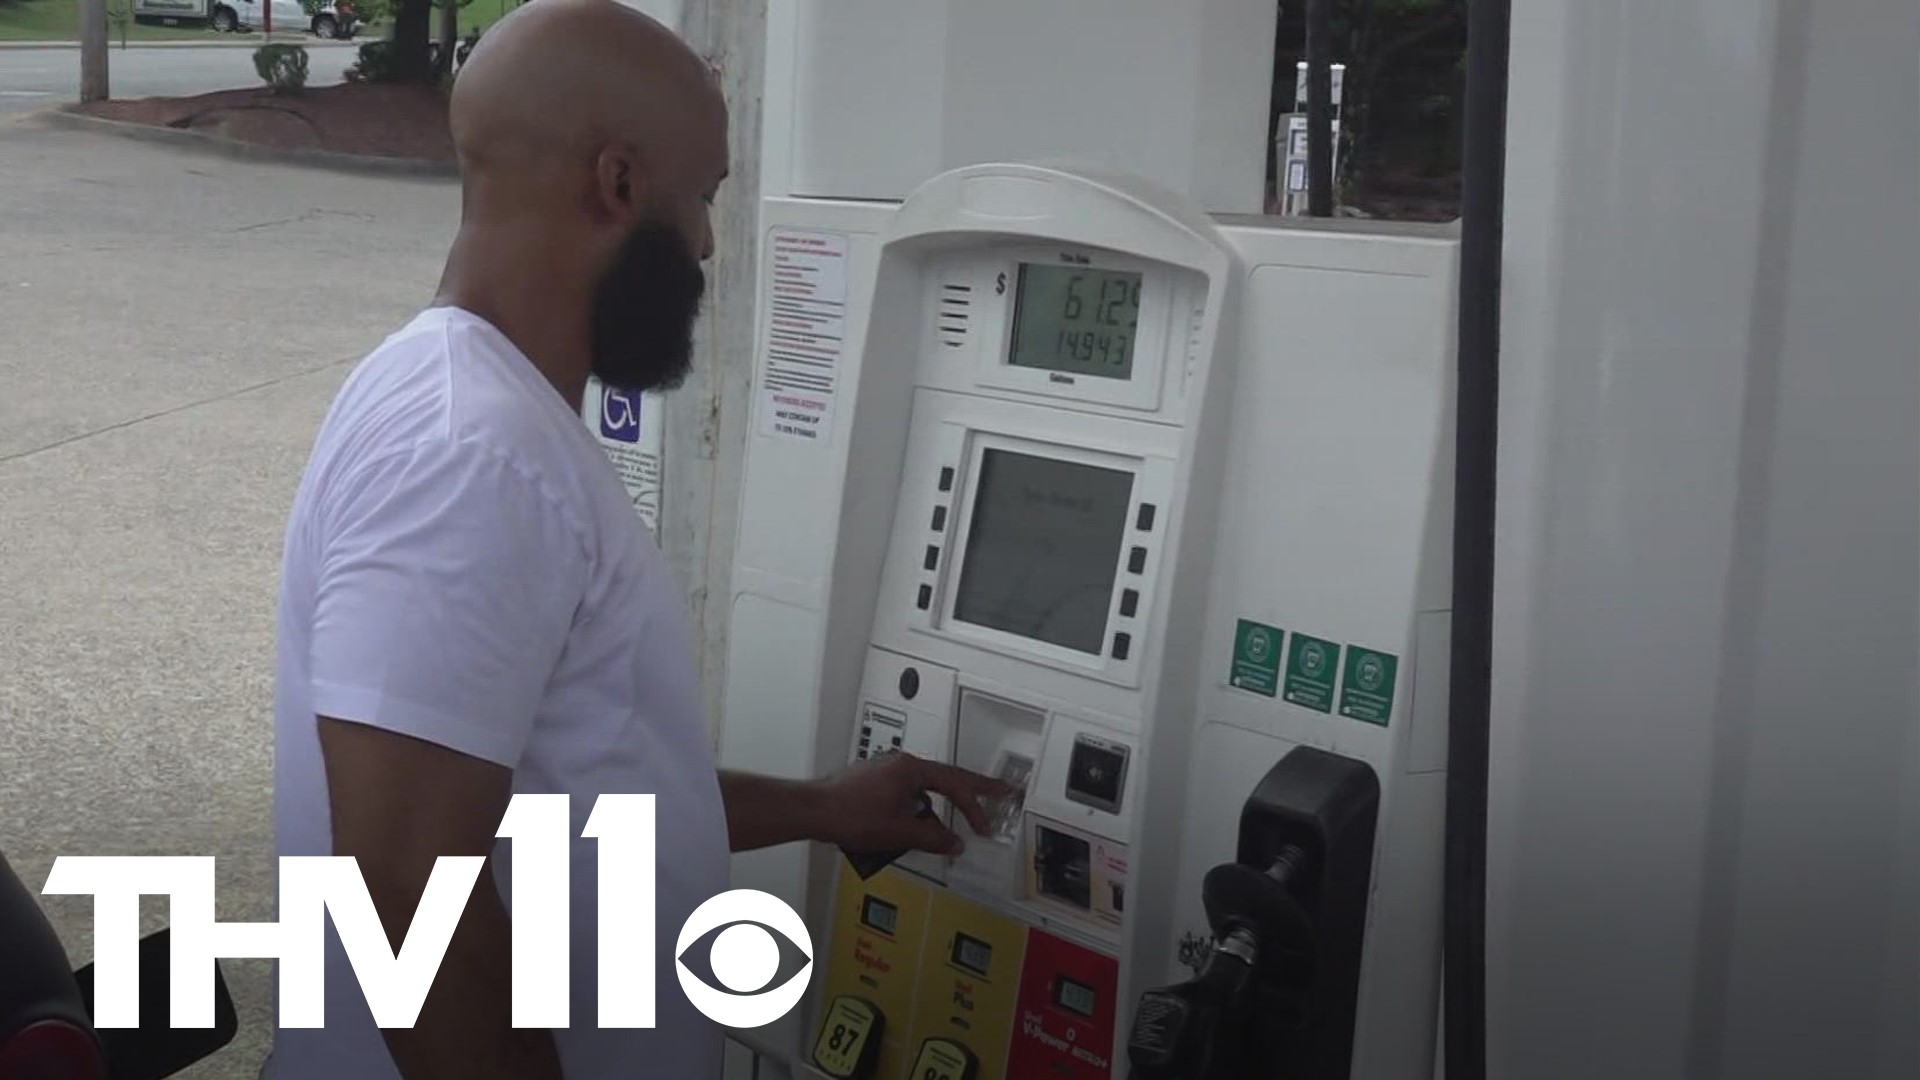 Gas prices in Arkansas have seen a steady increase for the last few weeks, and with Hurricane Ian making its way towards Florida, some worry the rise could get worse